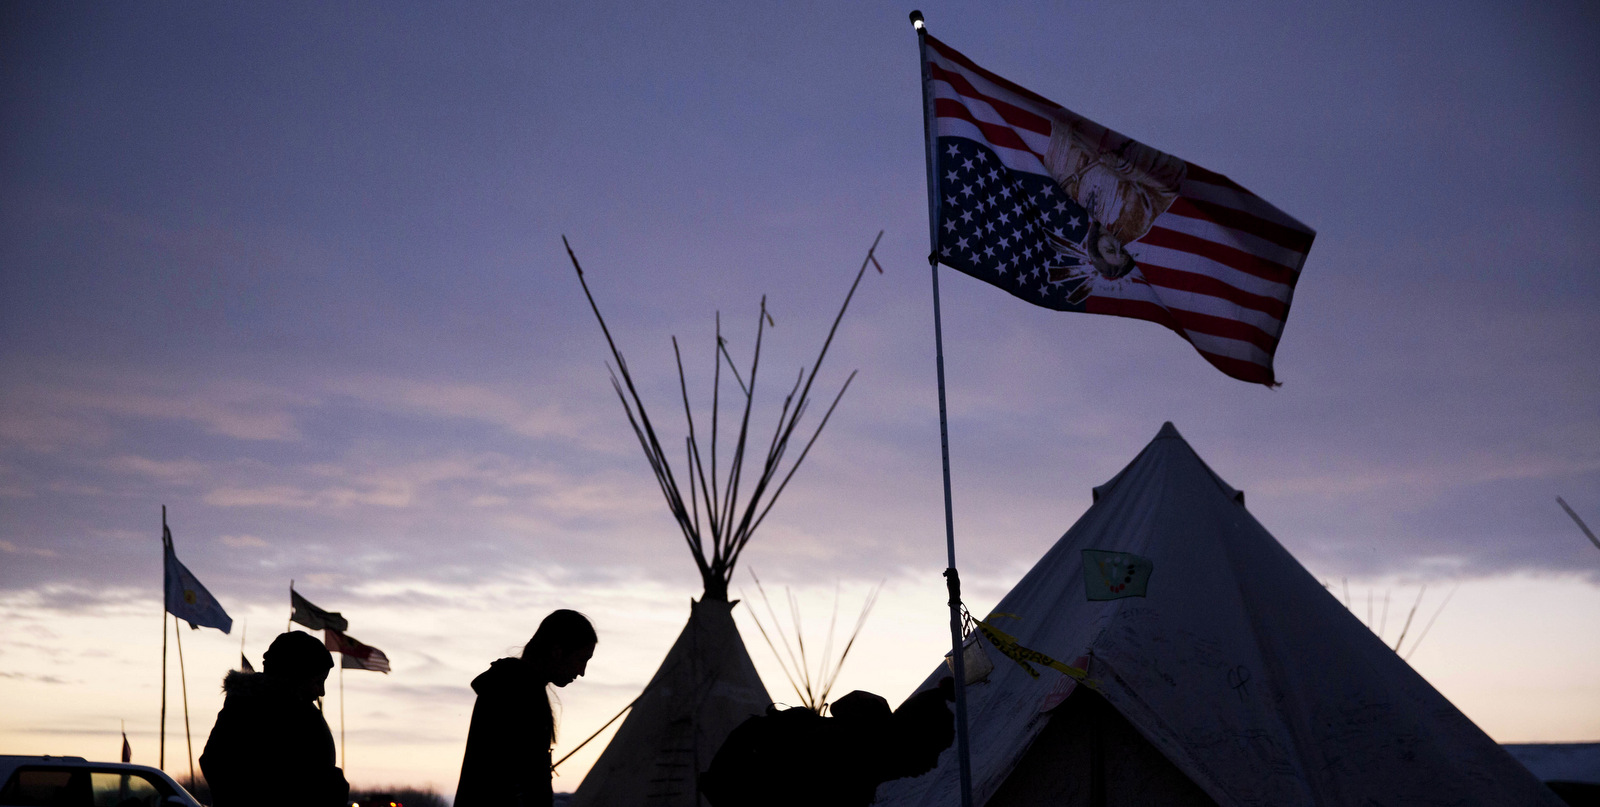 Travelers arrive at the Oceti Sakowin camp where people have gathered to protest the Dakota Access oil pipeline as they walk into a tent next to an upside-down american flag in Cannon Ball, N.D., Dec. 2, 2016. (AP/David Goldman)